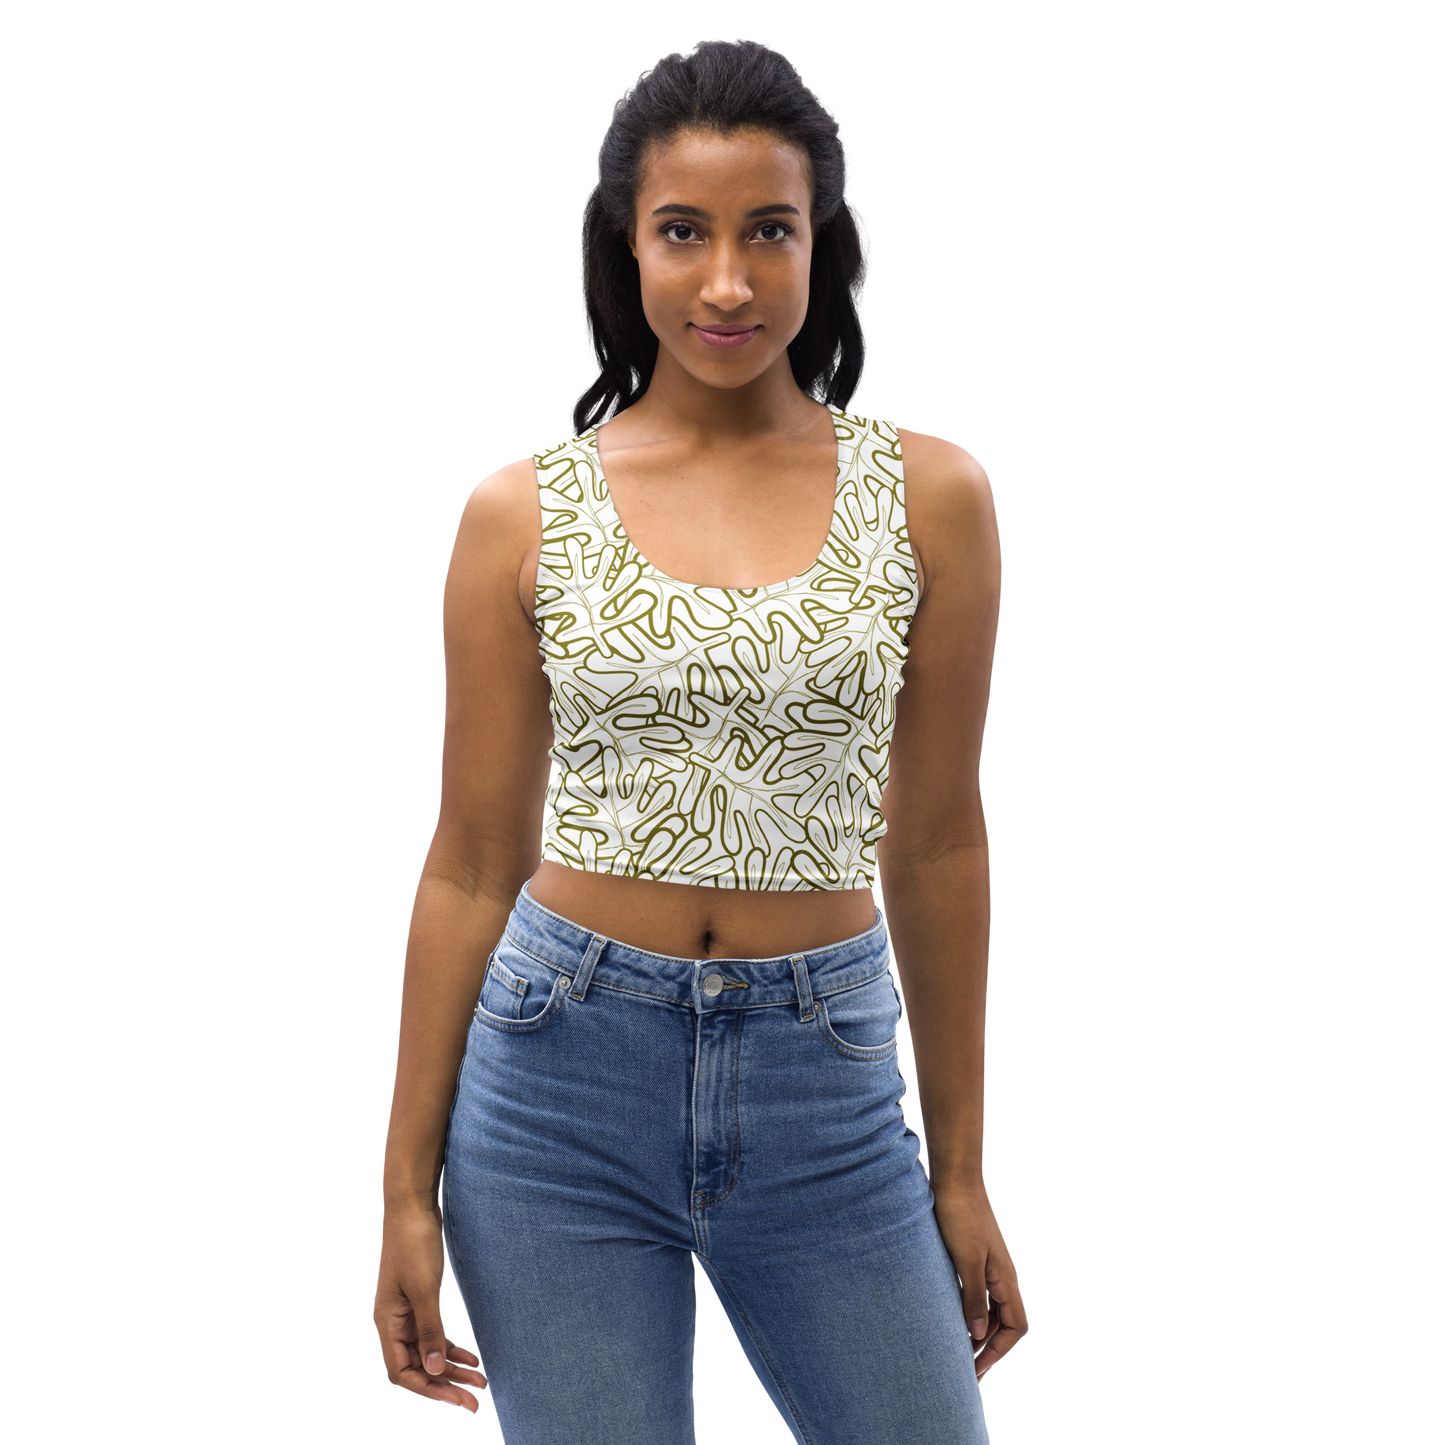 Colorful Fall Leaves | Seamless Patterns | All-Over Print Crop Top - #2